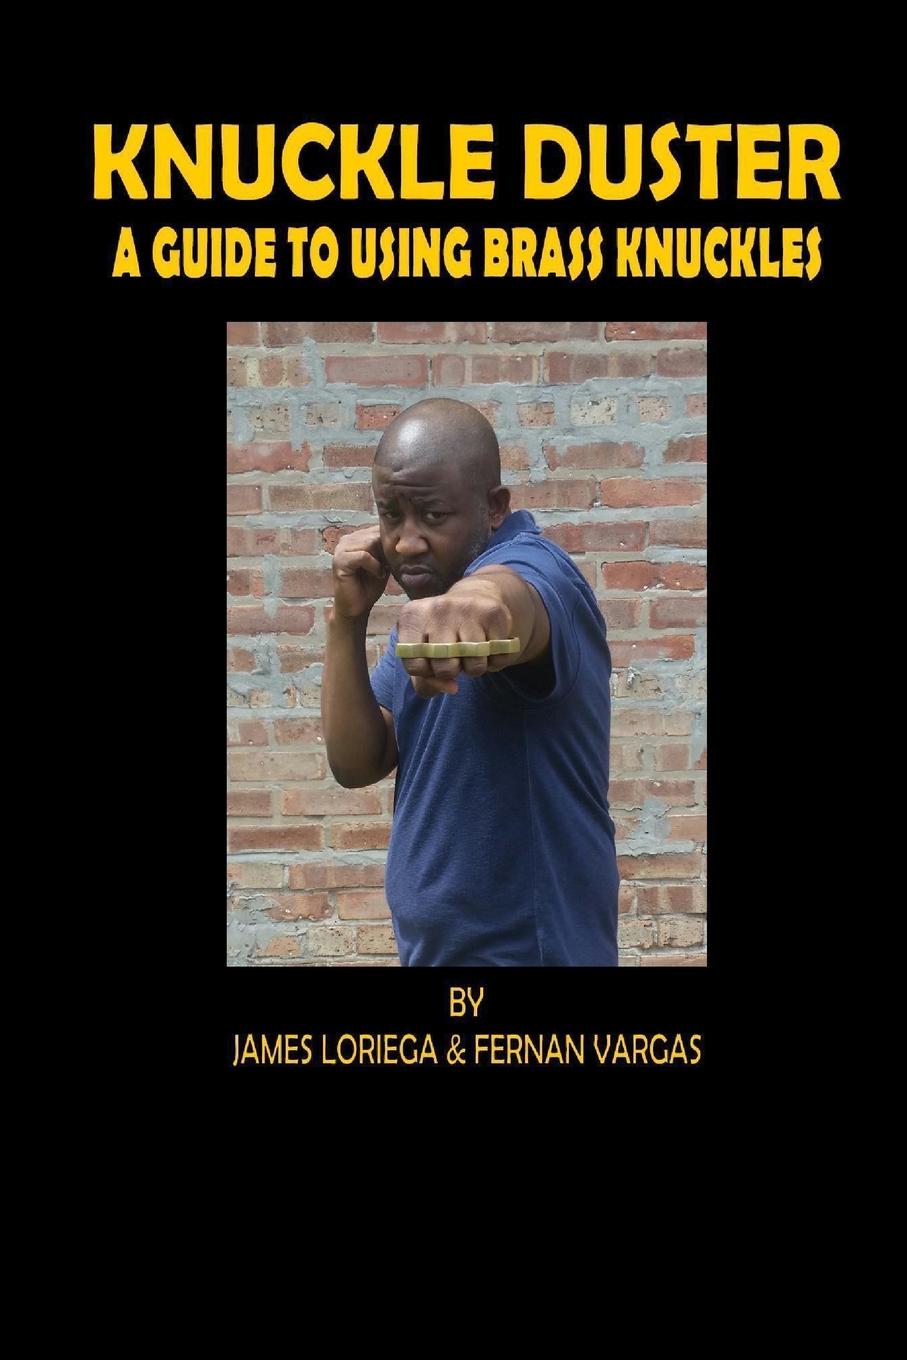 Kuckle Duster. A Guide to Using Brass Knuckles